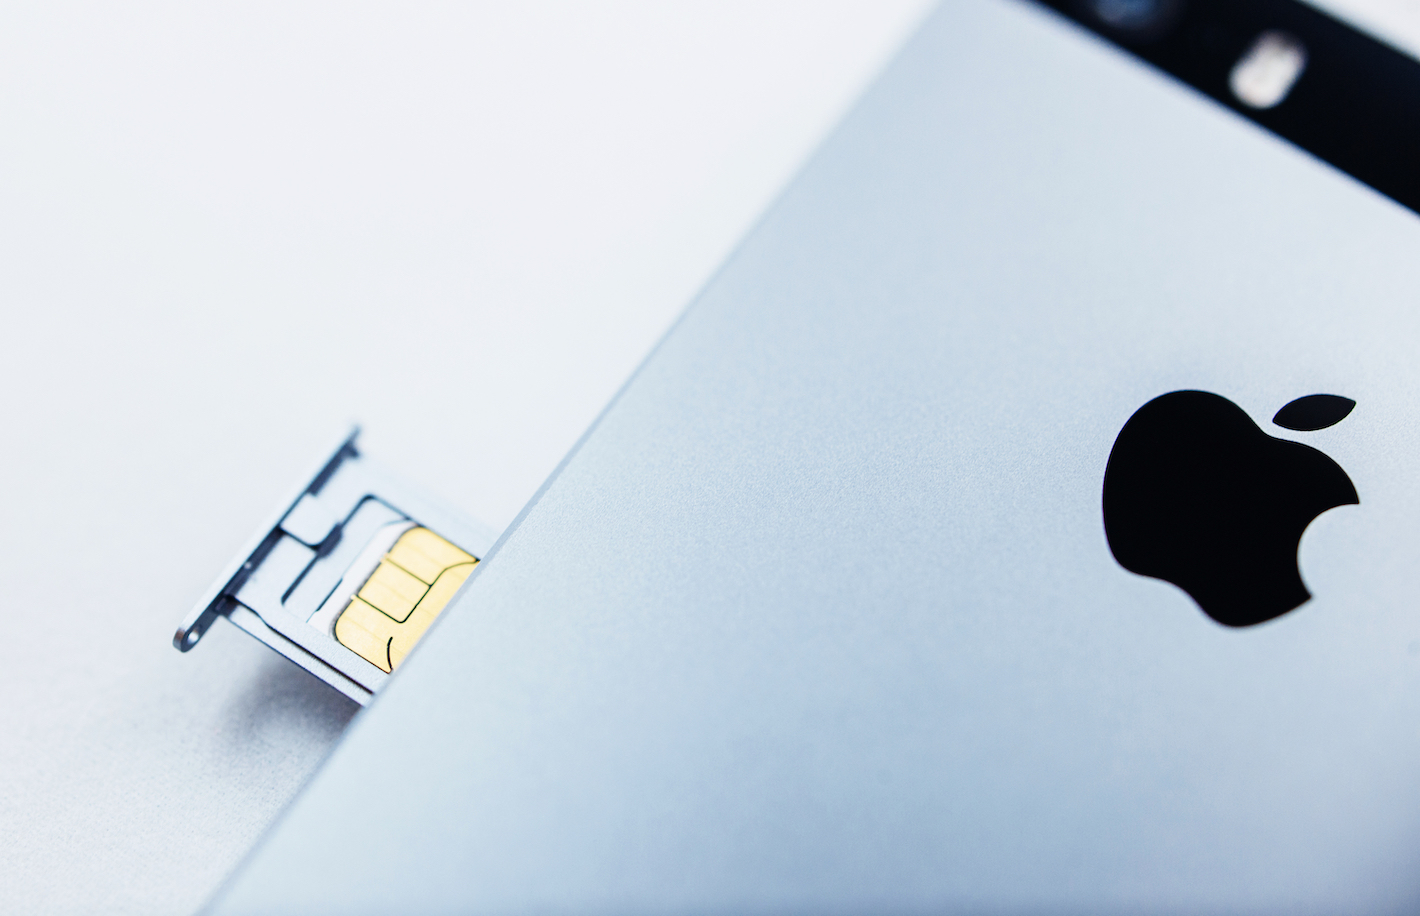 Us-officials-allege-student-defrauded-apple-as-part-of-sim-swap-attack